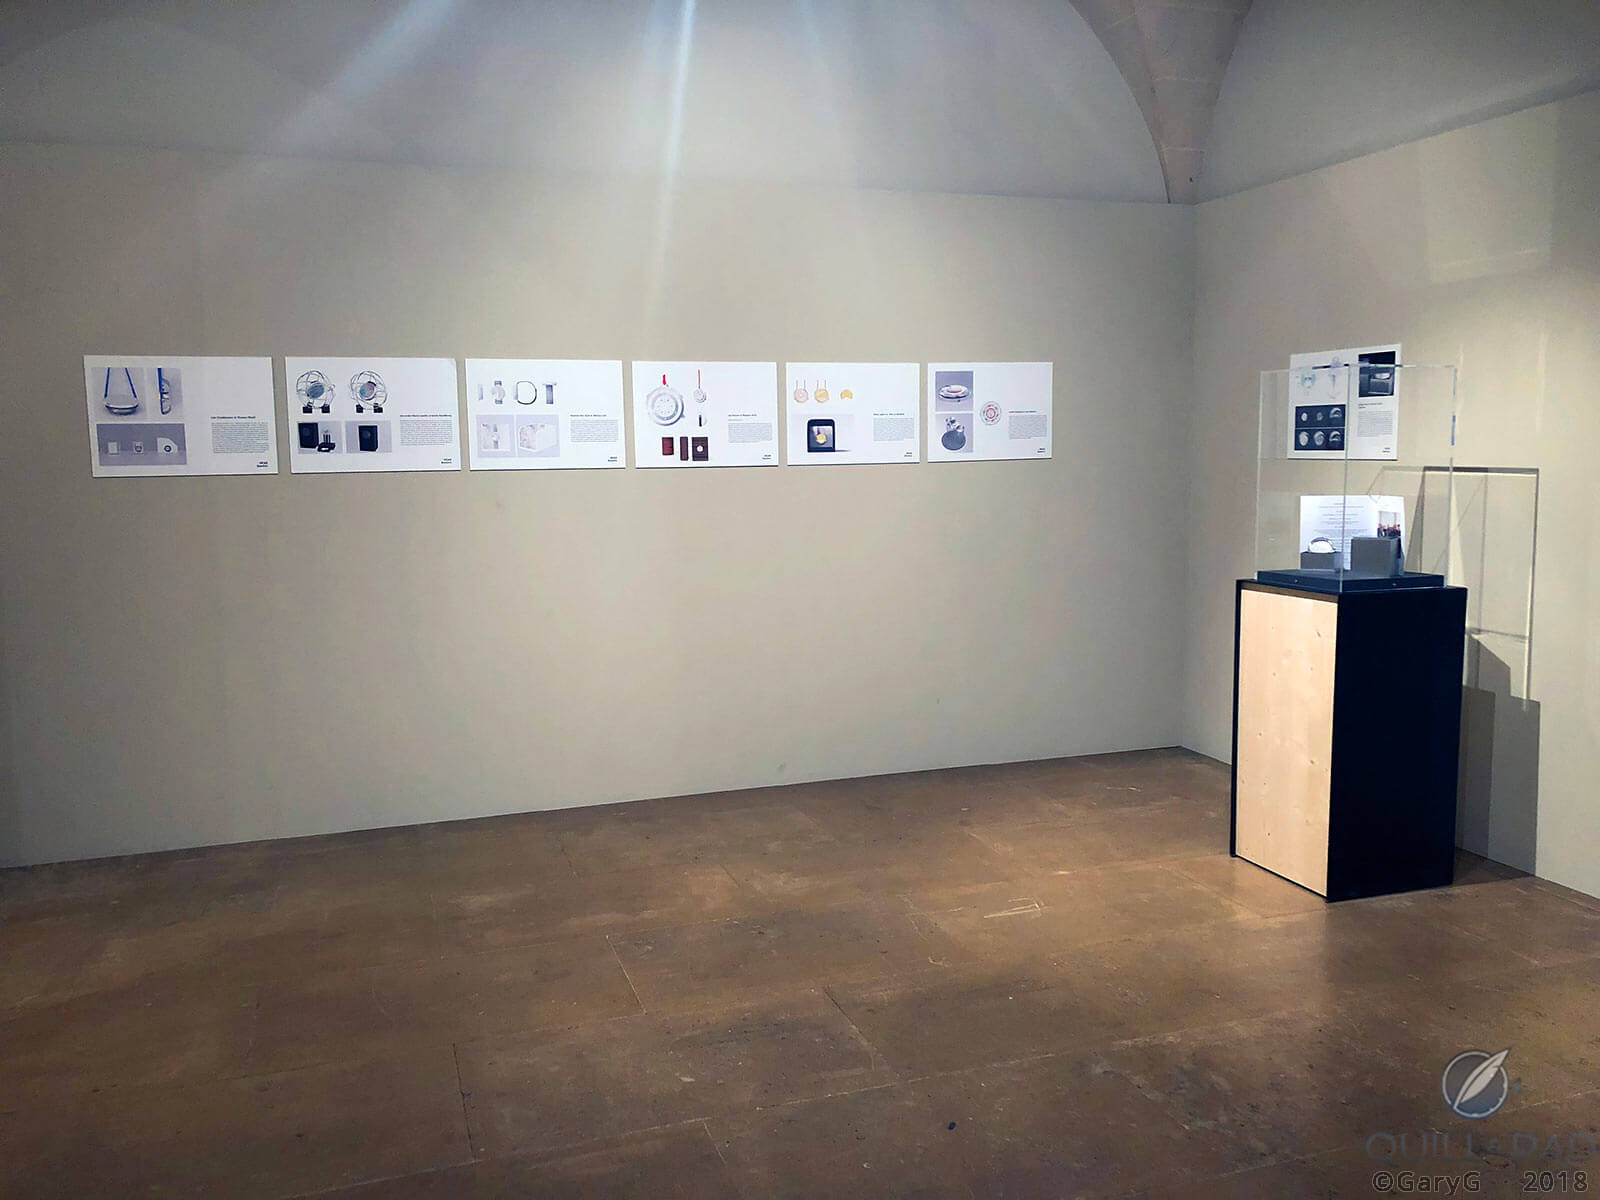 On display: an exhibition of the author’s Carpe Diem clock and the competing designs from students at HEAD Geneva